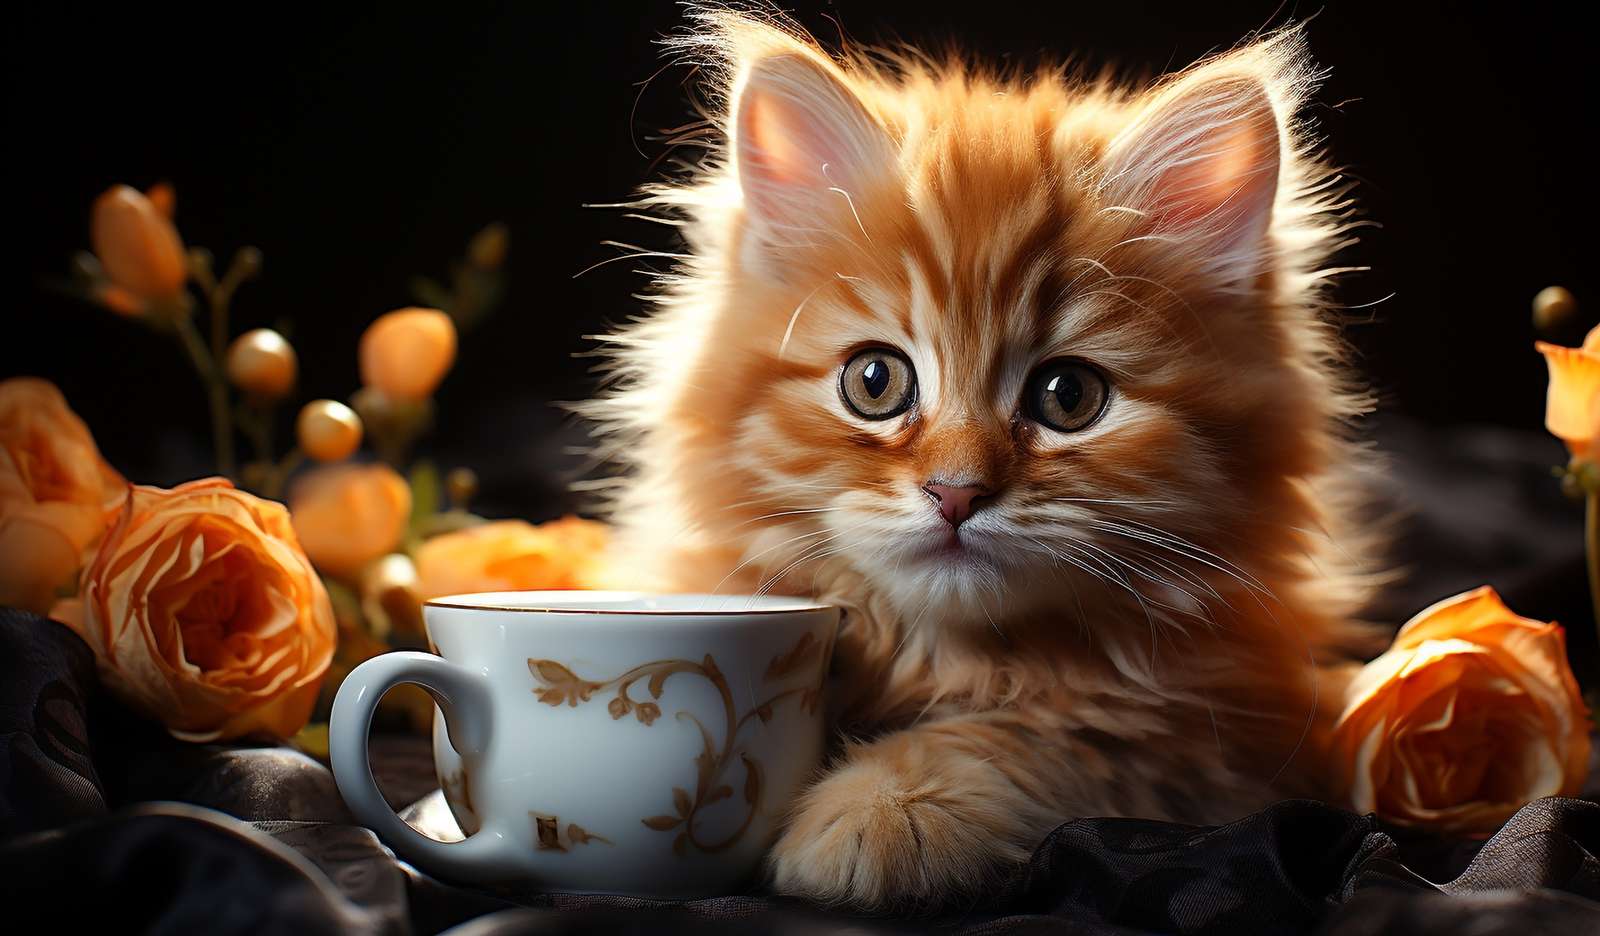 A small ginger kitten next to a cup and roses online puzzle